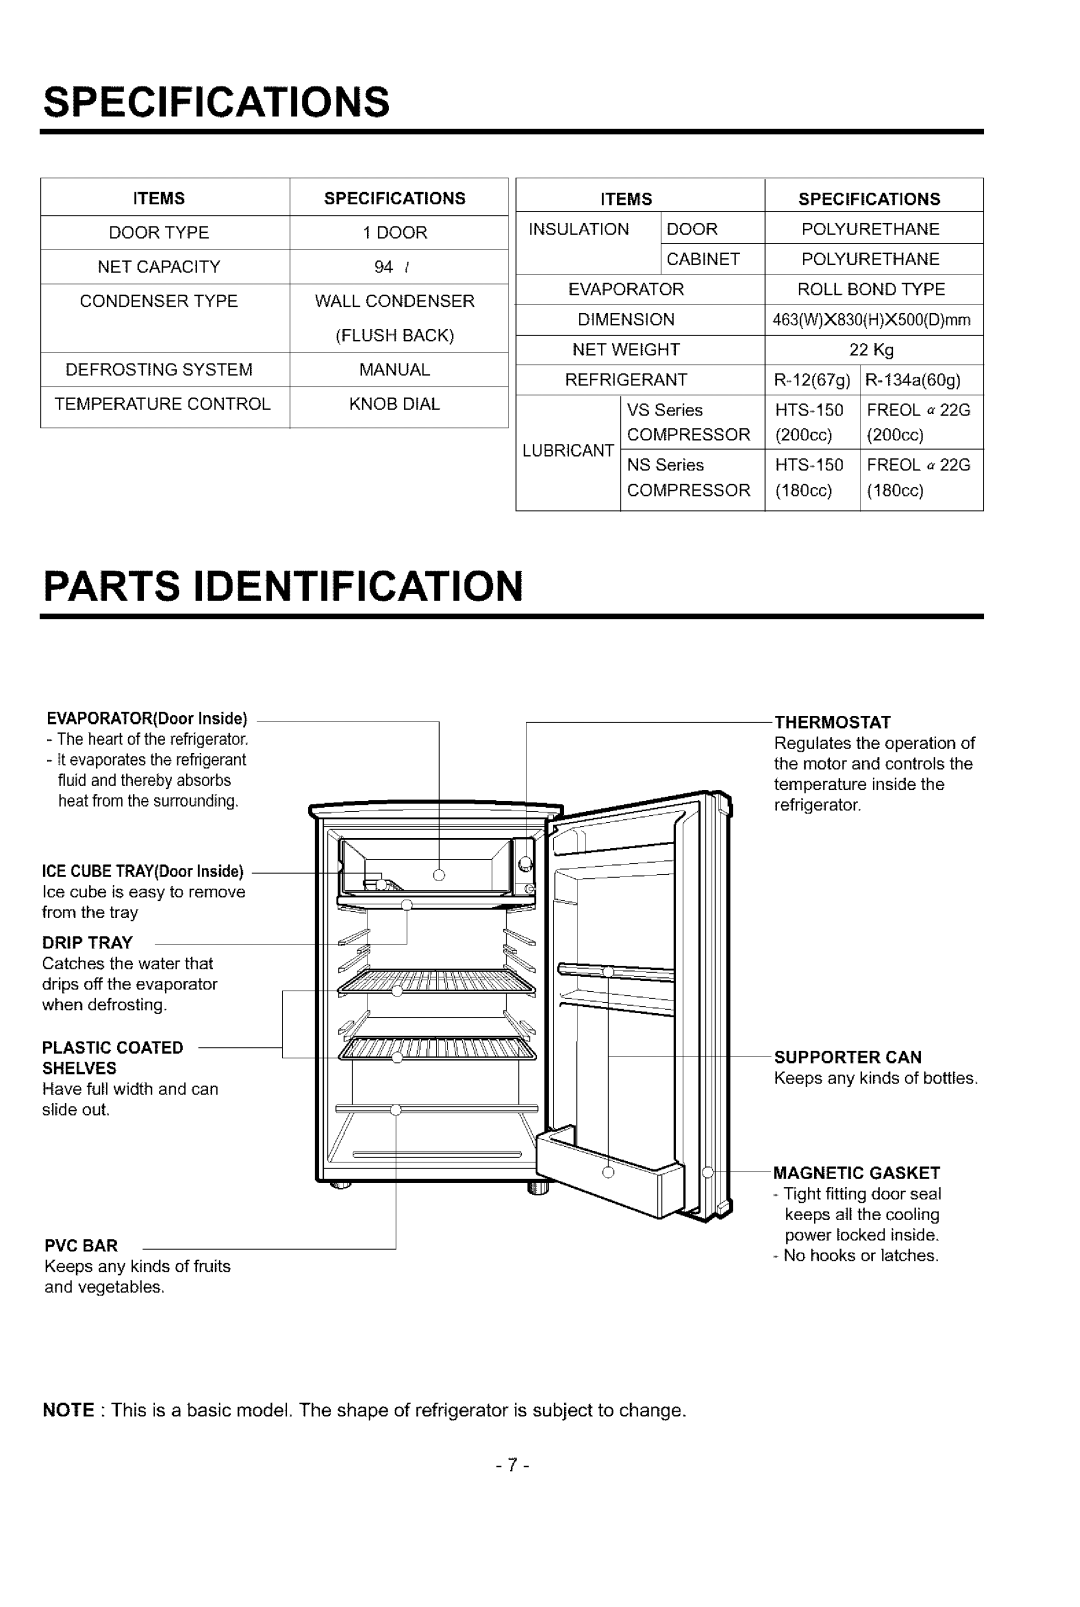 Sears GR-151SPF Specifications, Parts Identification, Items, EVAPORATORDoor Inside, Pvc Bar, Thermostat, Magnetic Gasket 